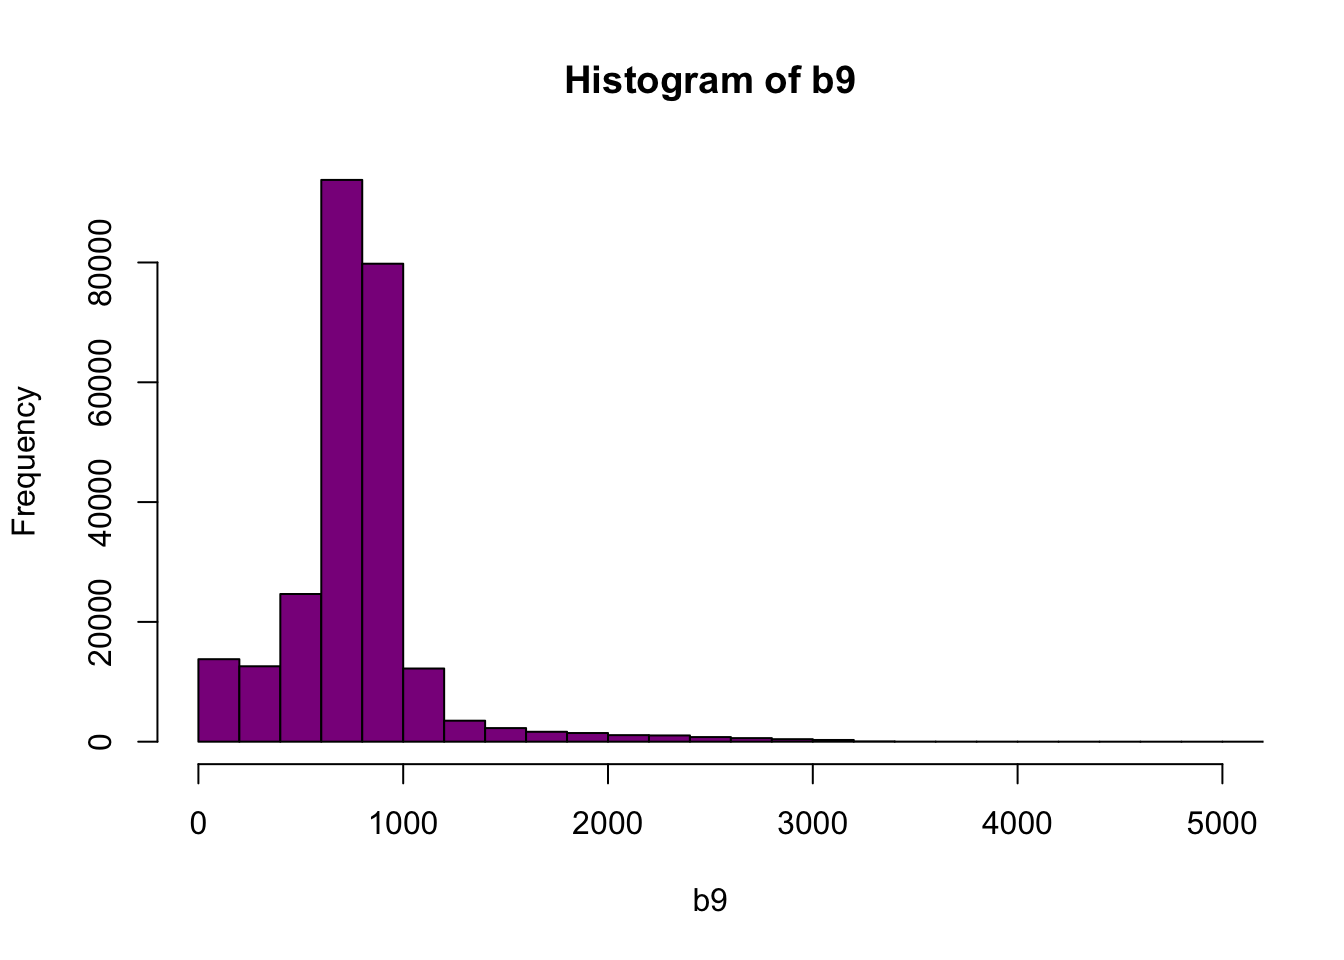 Histogram of reflectance values between 0 and 5000 for band 9. Reflectance values are on the x-axis, and the frequency is on the y-axis. The x-axis limit has been set 5000 in order to better visualize the distribution of reflectance values. We can confirm that the majority of the values are indeed within the 0 to 4000 range.